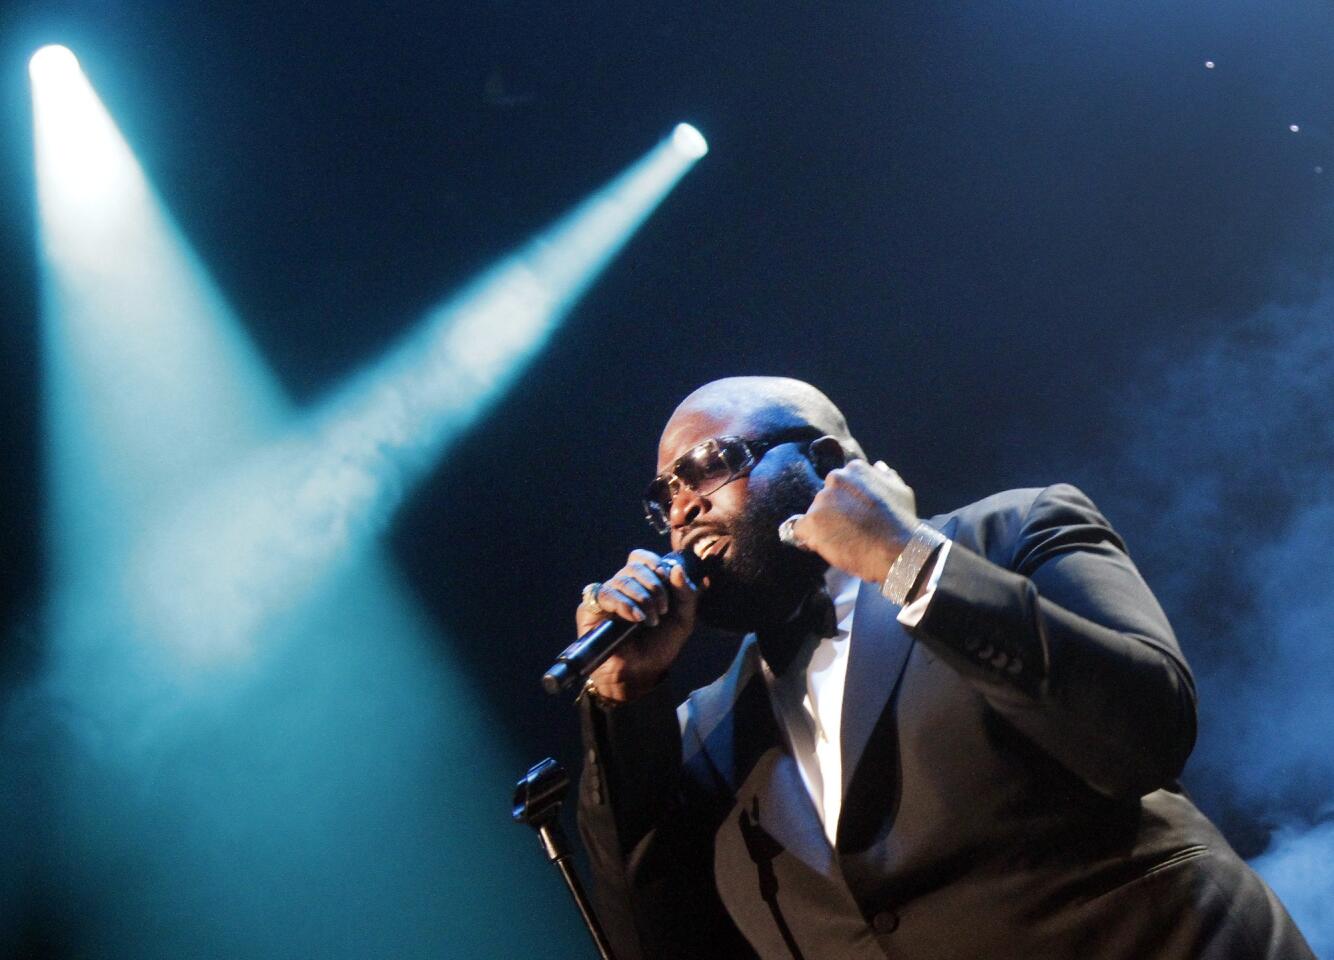 Rick Ross dons a tuxedo for his performance at Club Nokia in Los Angeles on Aug. 14, 2013.